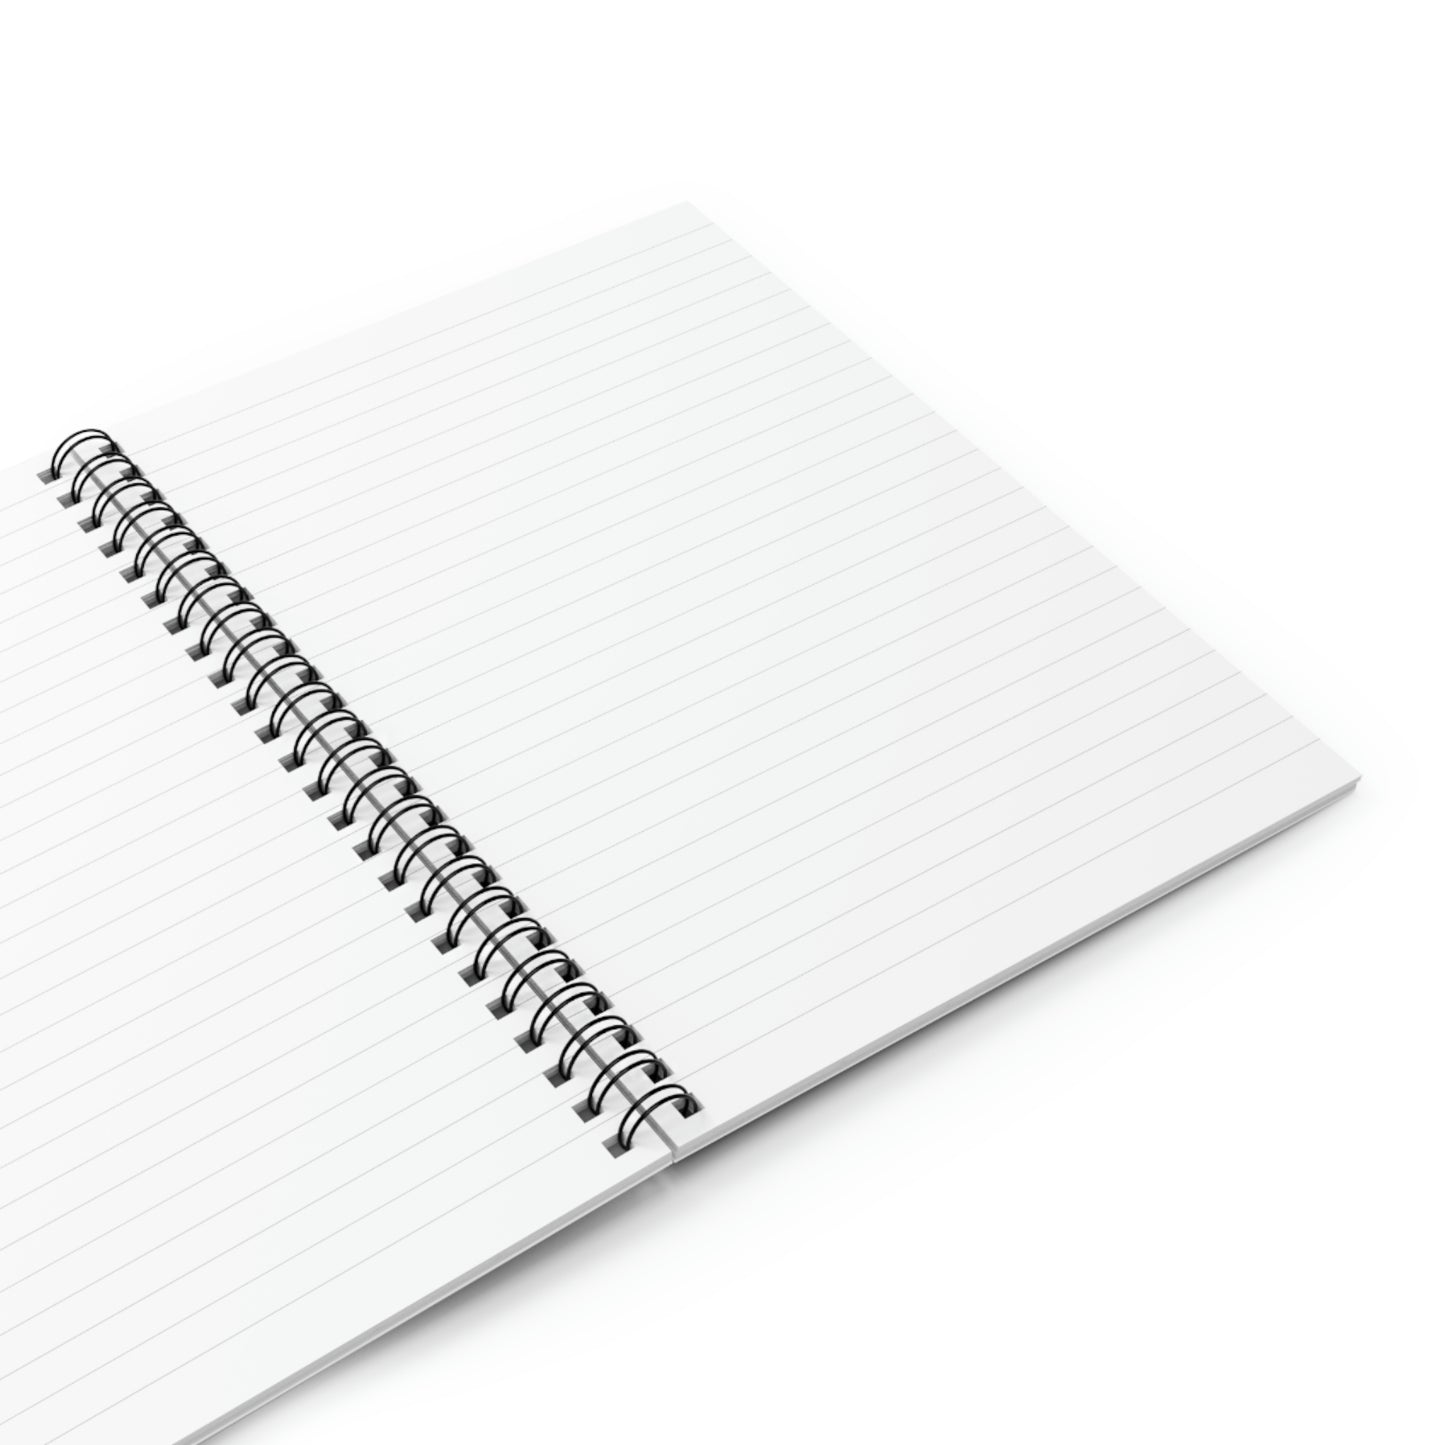 Agile Word Cloud Notebook - Spiral Notebook - Ruled Line